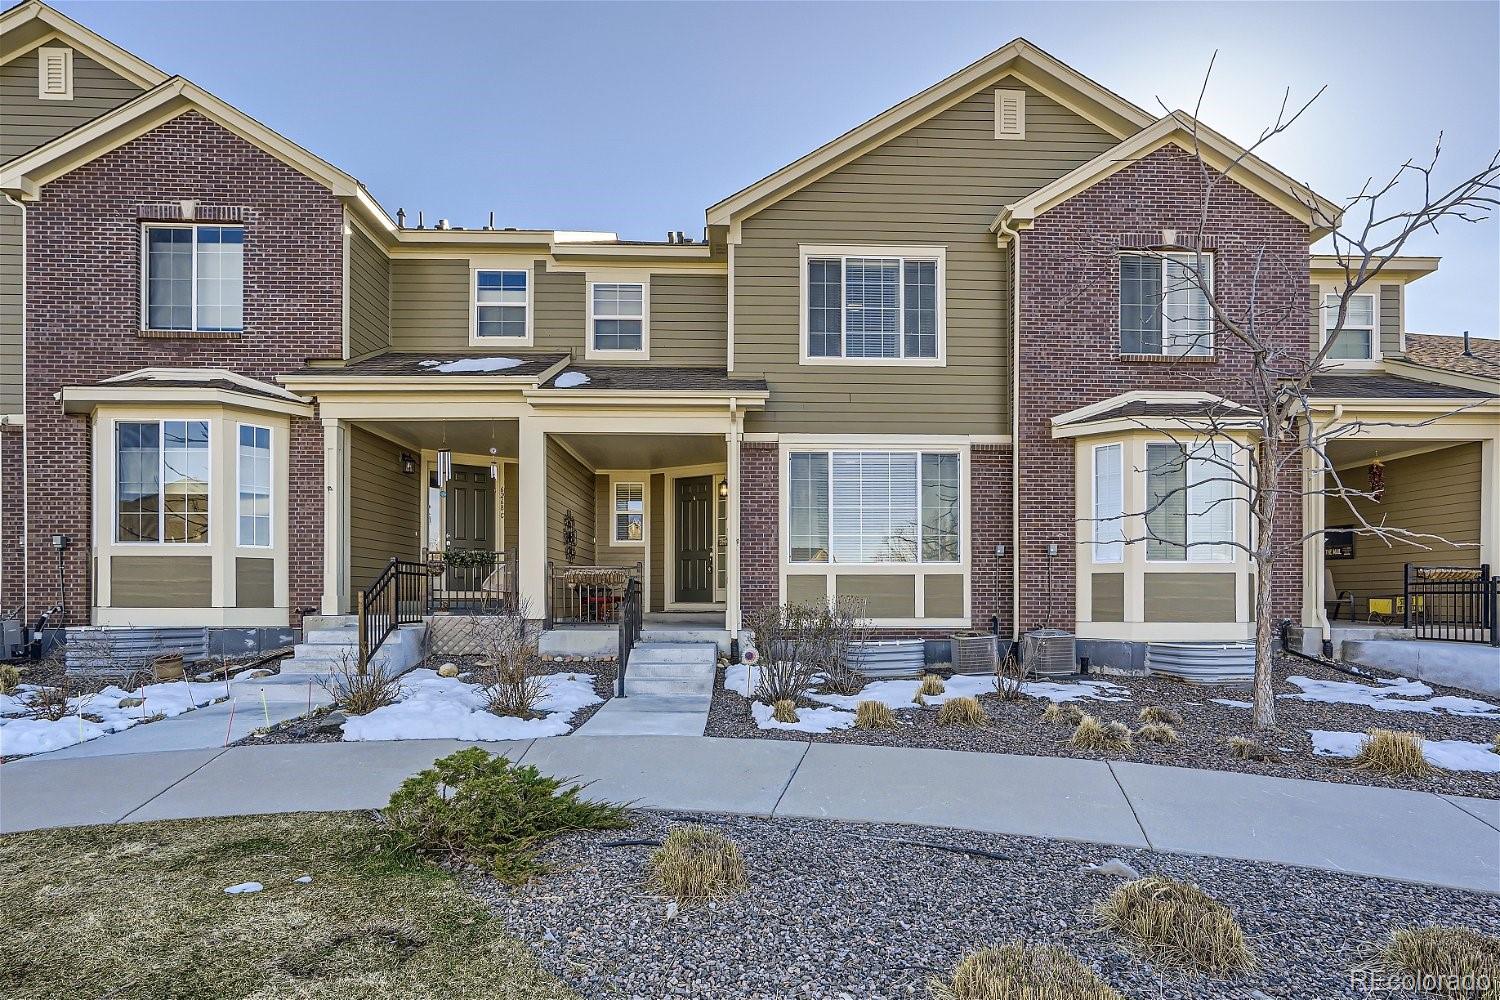 6268  Pike Court, arvada MLS: 9112111 Beds: 3 Baths: 3 Price: $650,000